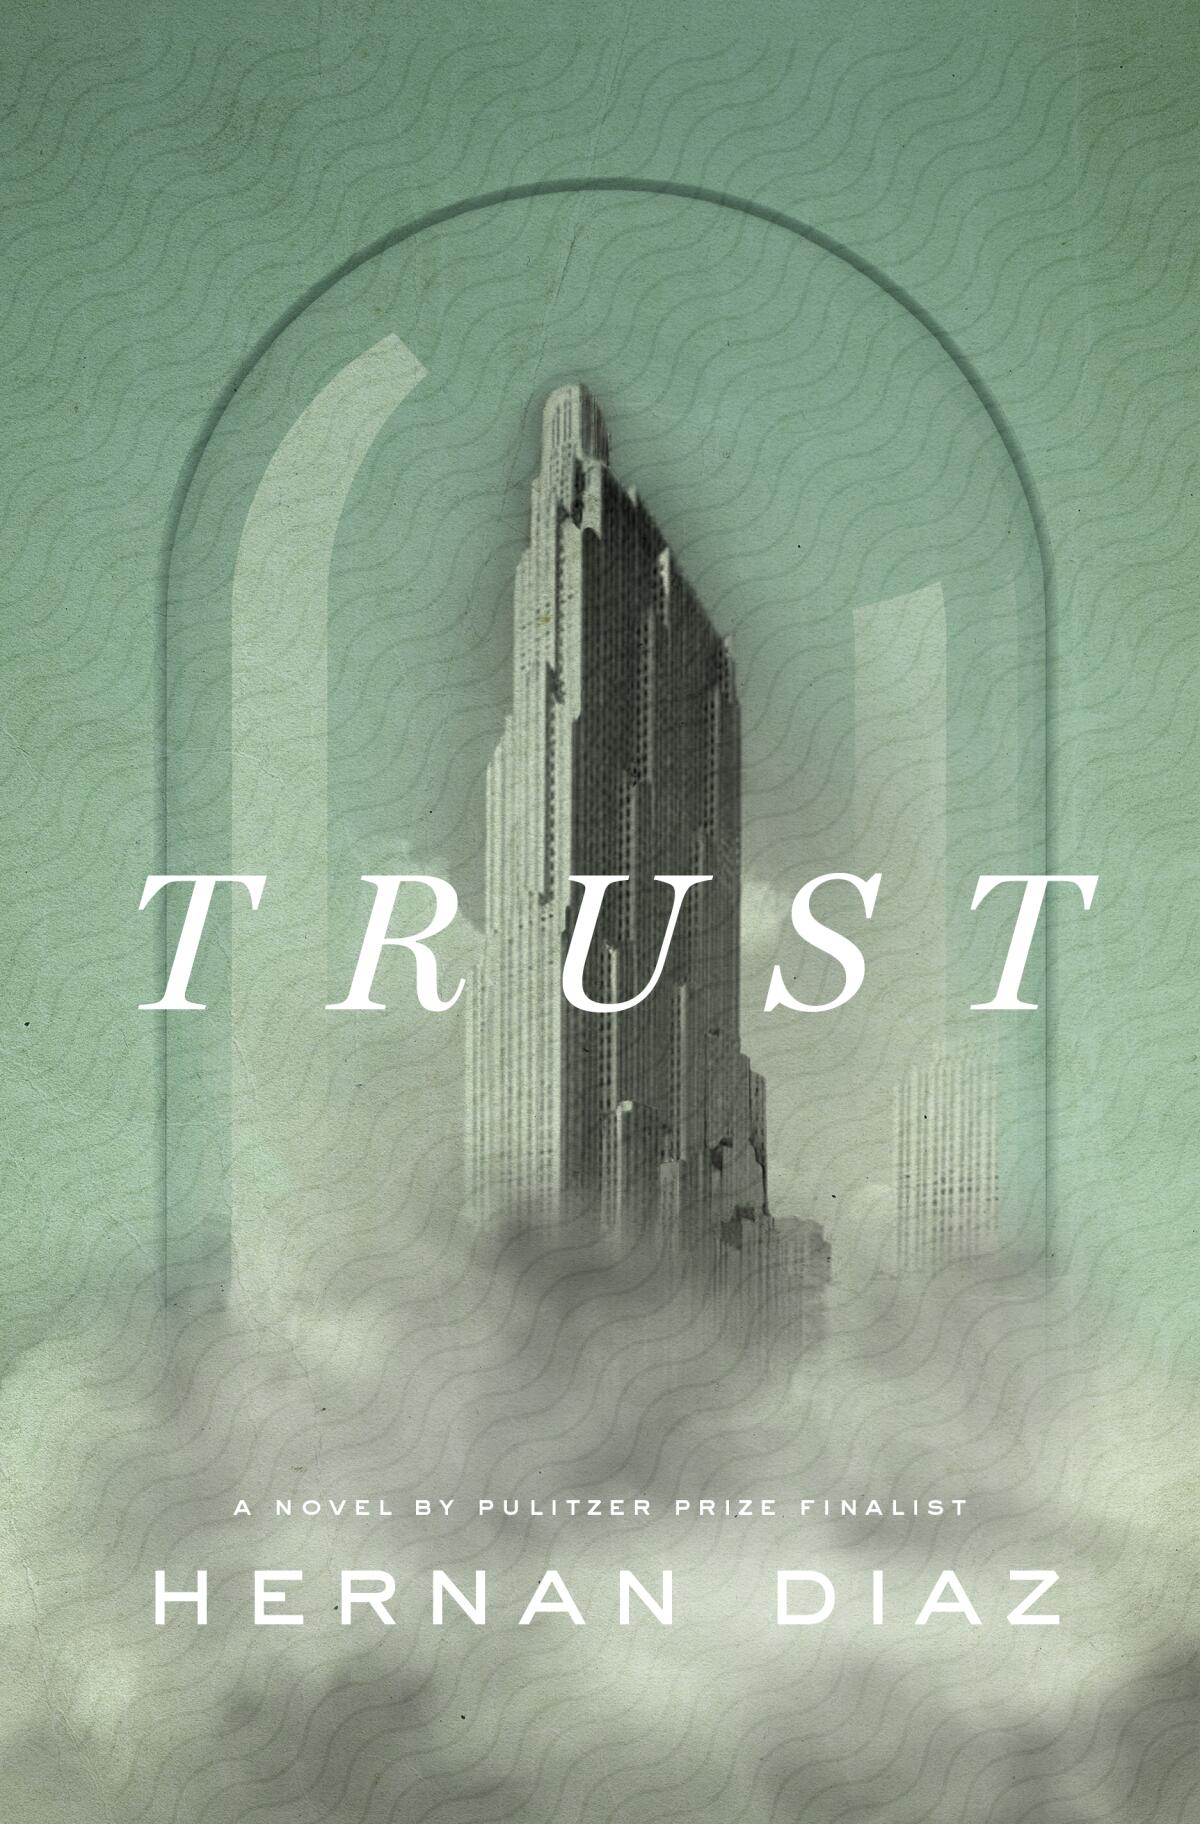 "Trust" cover with an image of a tall building under glass with clouds or smoke along the bottom